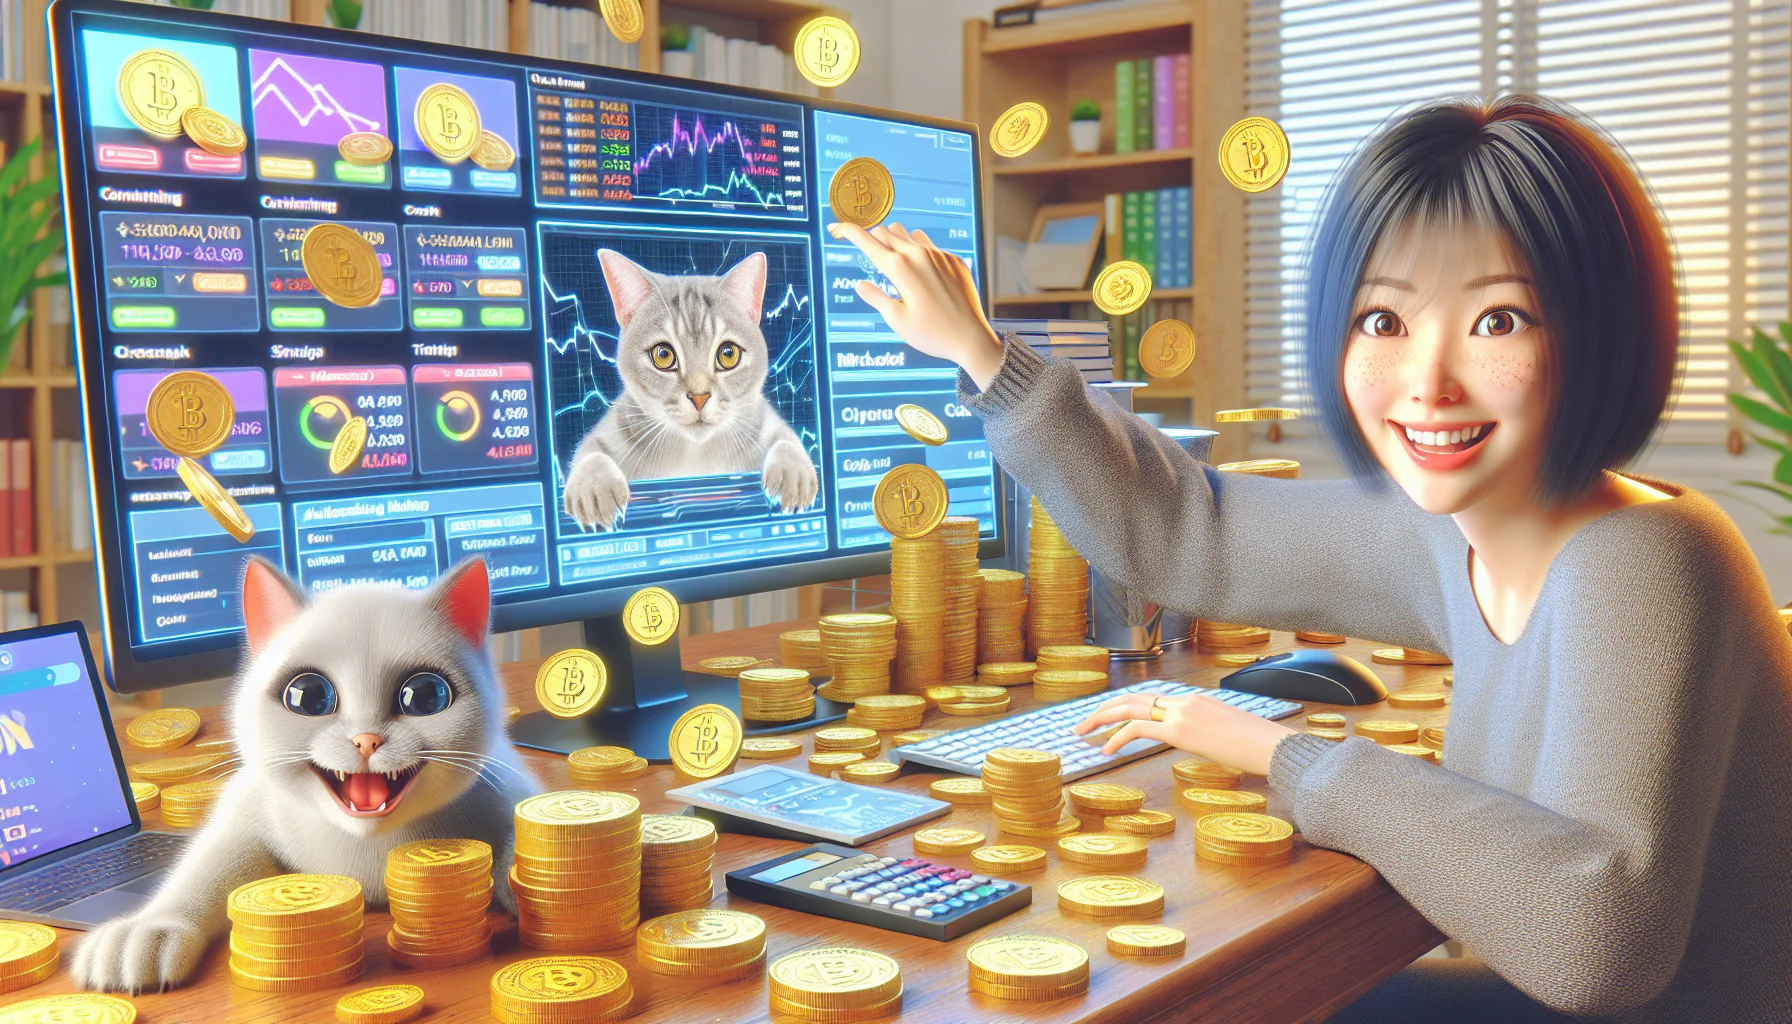 Generate a light-hearted, realistic depiction of a generic affiliate marketer set in the realm of online money-making. The scenery consists of a cluttered desk scattered with stacks of virtual coins signifying digital currencies. On the computer screen, there are multiple open tabs displaying various marketing analytics tools. The marketer is of Asian descent, and her eyes sparkle with excitement. Next to her, a playful cat tries to paw at the coin graphics on the screen, indicating the fun aspect of the work. The scene should inspire and entice viewers about the possibilities of online financial success.